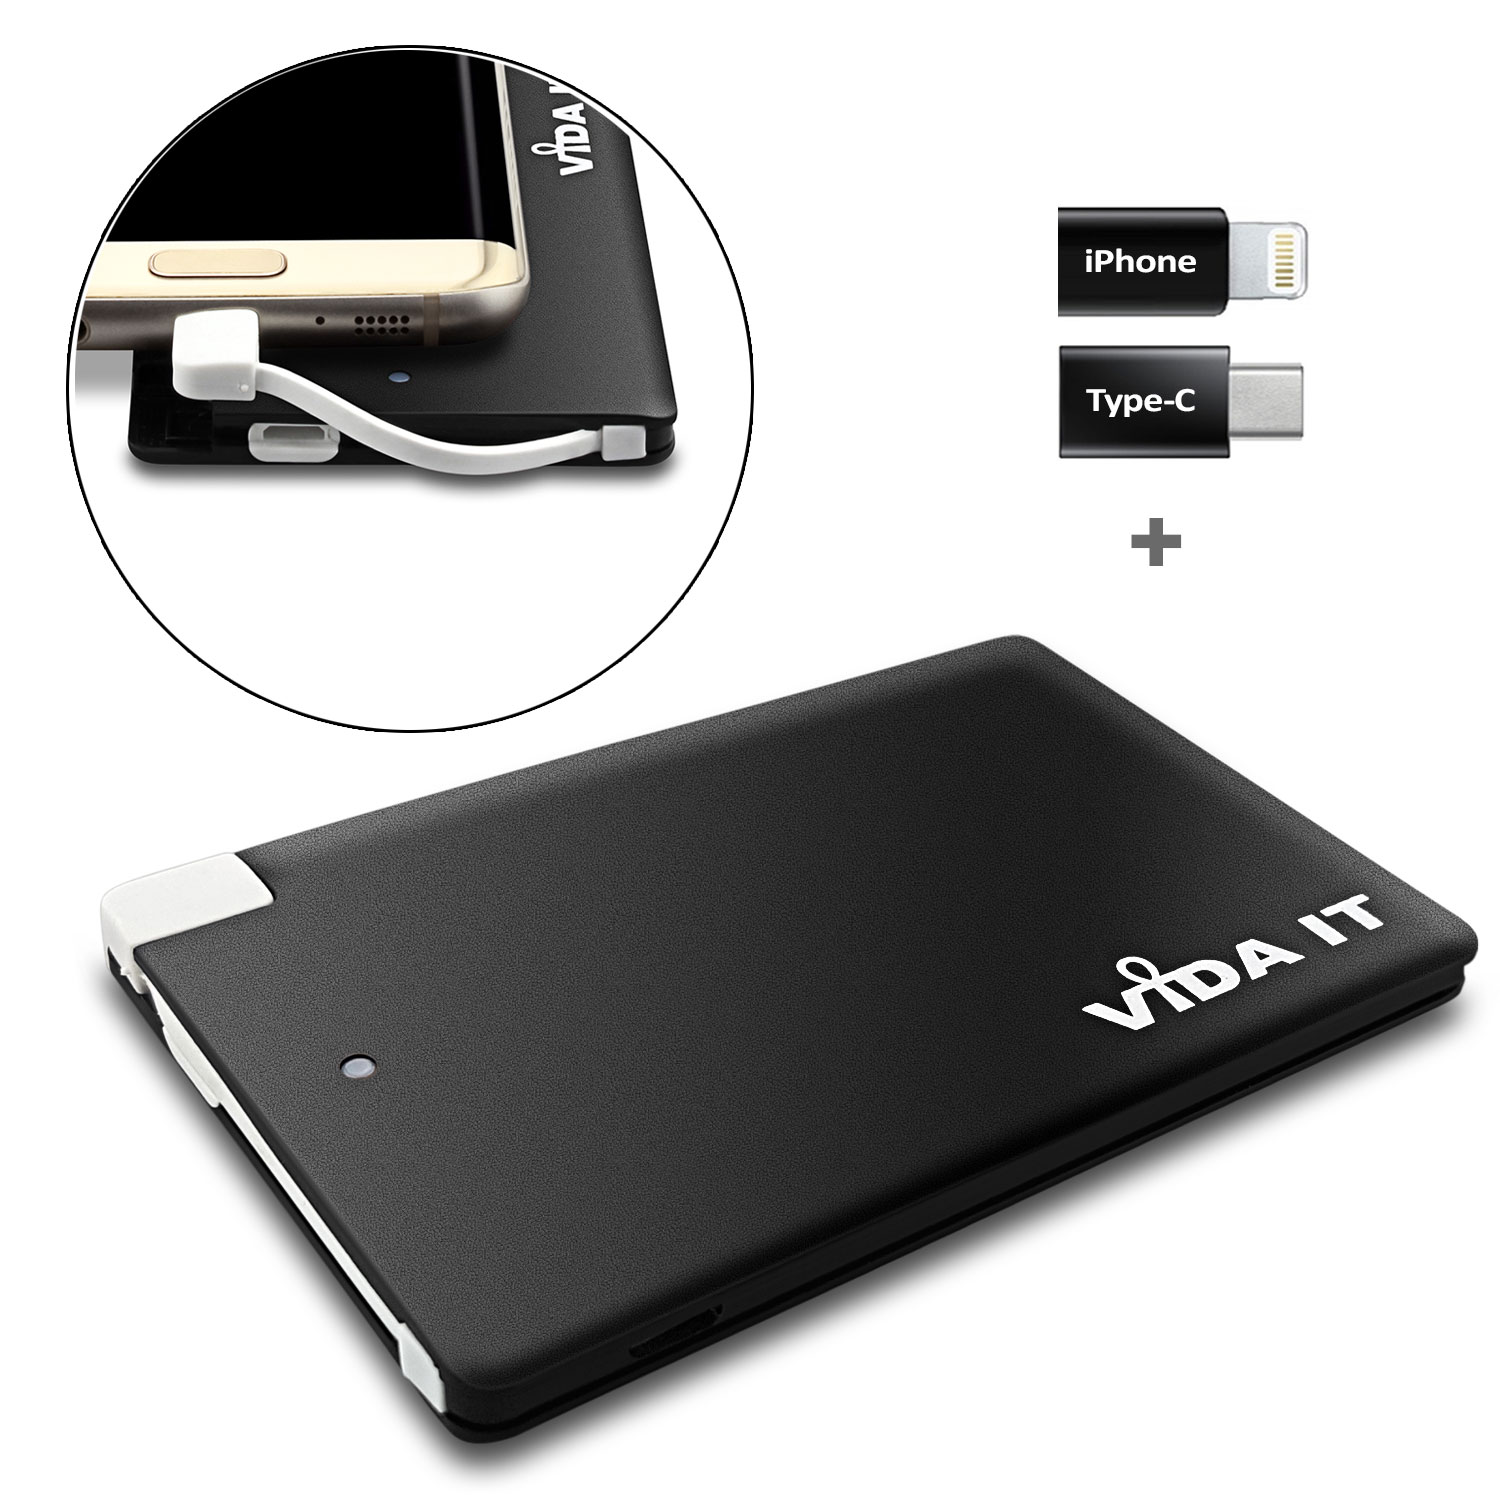 Slim credit card design Power Bank 2500mAh external battery pack thin portable USB charger with built-in micro-usb charging cable plus two adapters for iPhone and type-C for mobile phones